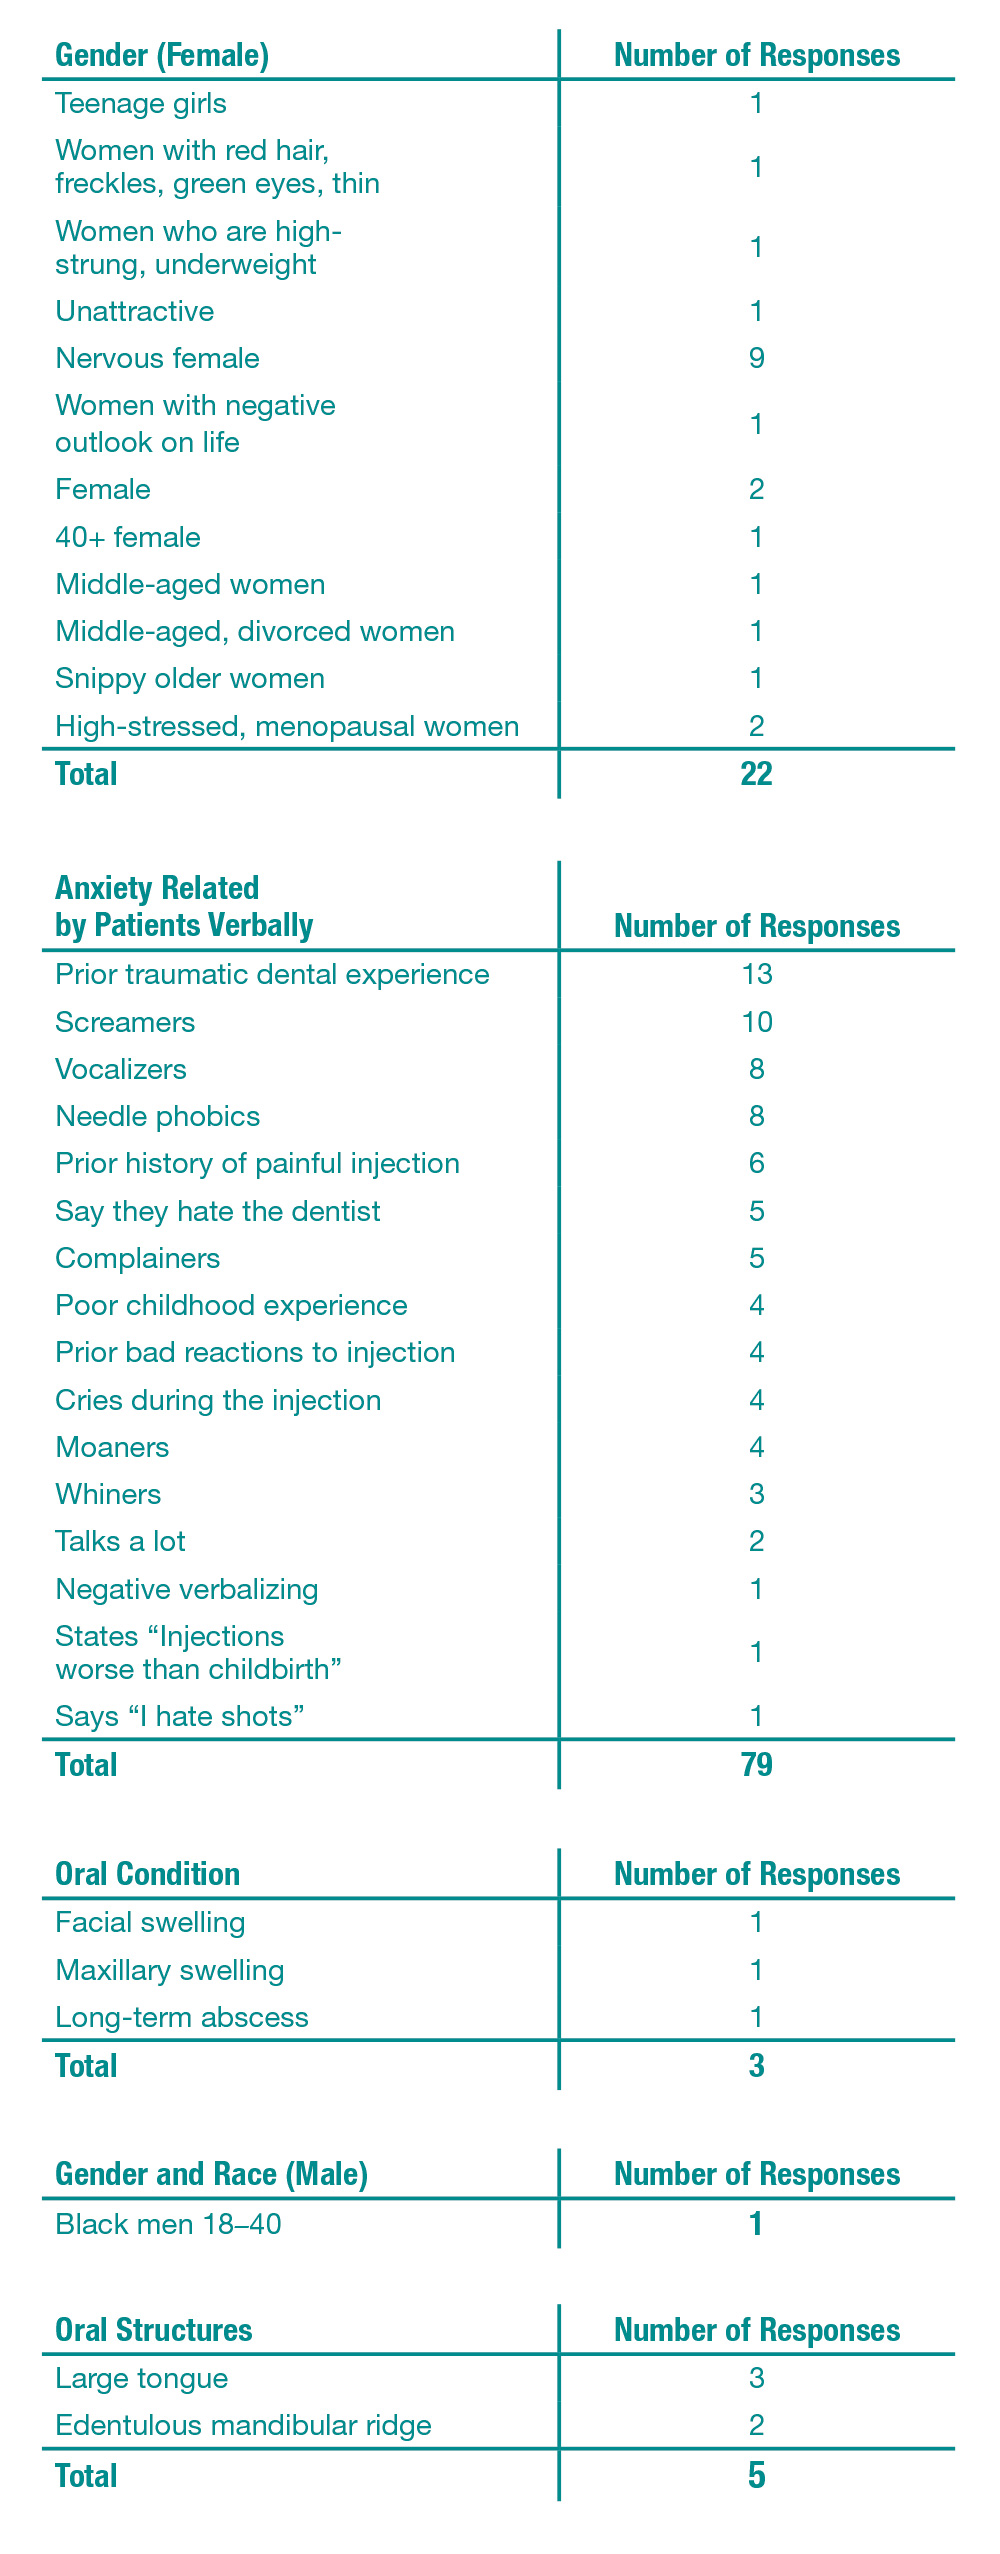 Table 1 Gender, Anxiety Level, Oral Condition and Structure